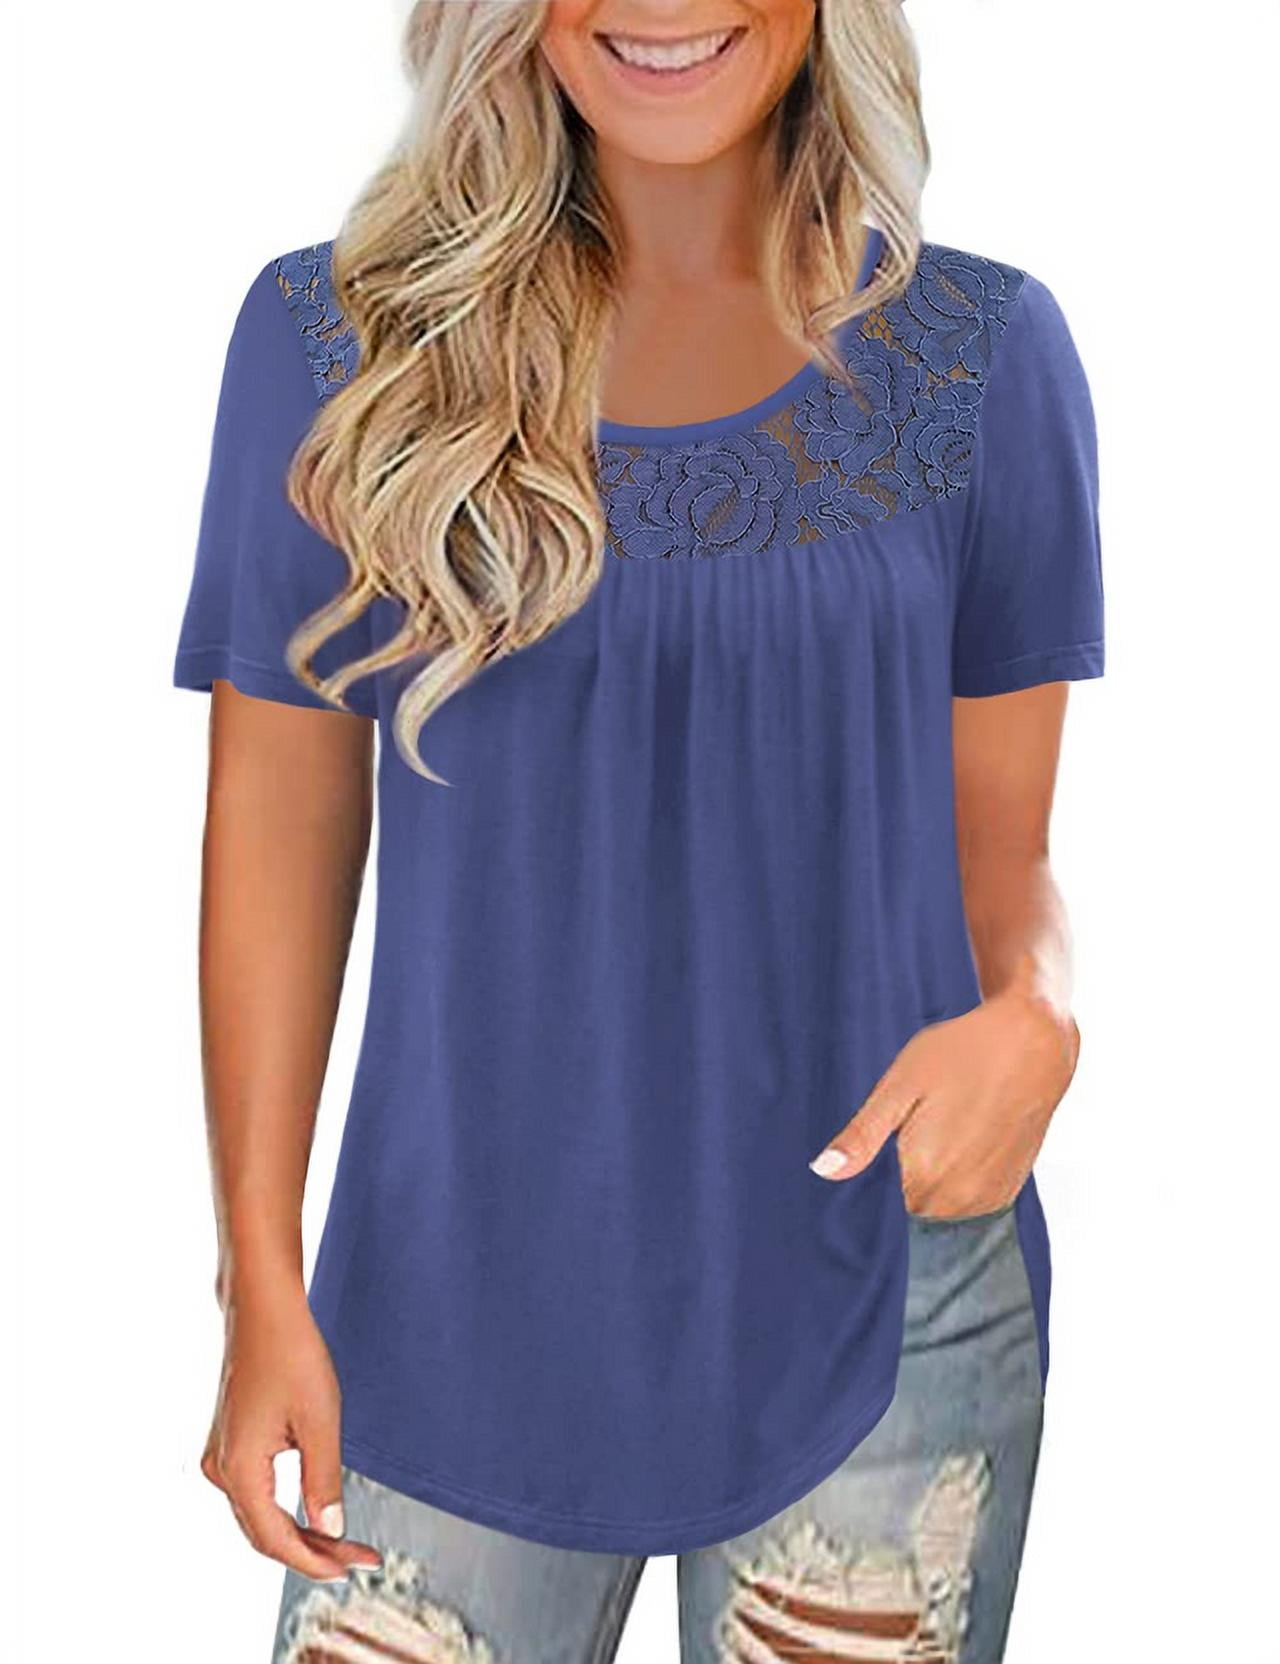 LETDIOSTO Women's Plus Size Tops Short Sleeve Shirts Lace Pleated Tunic ...